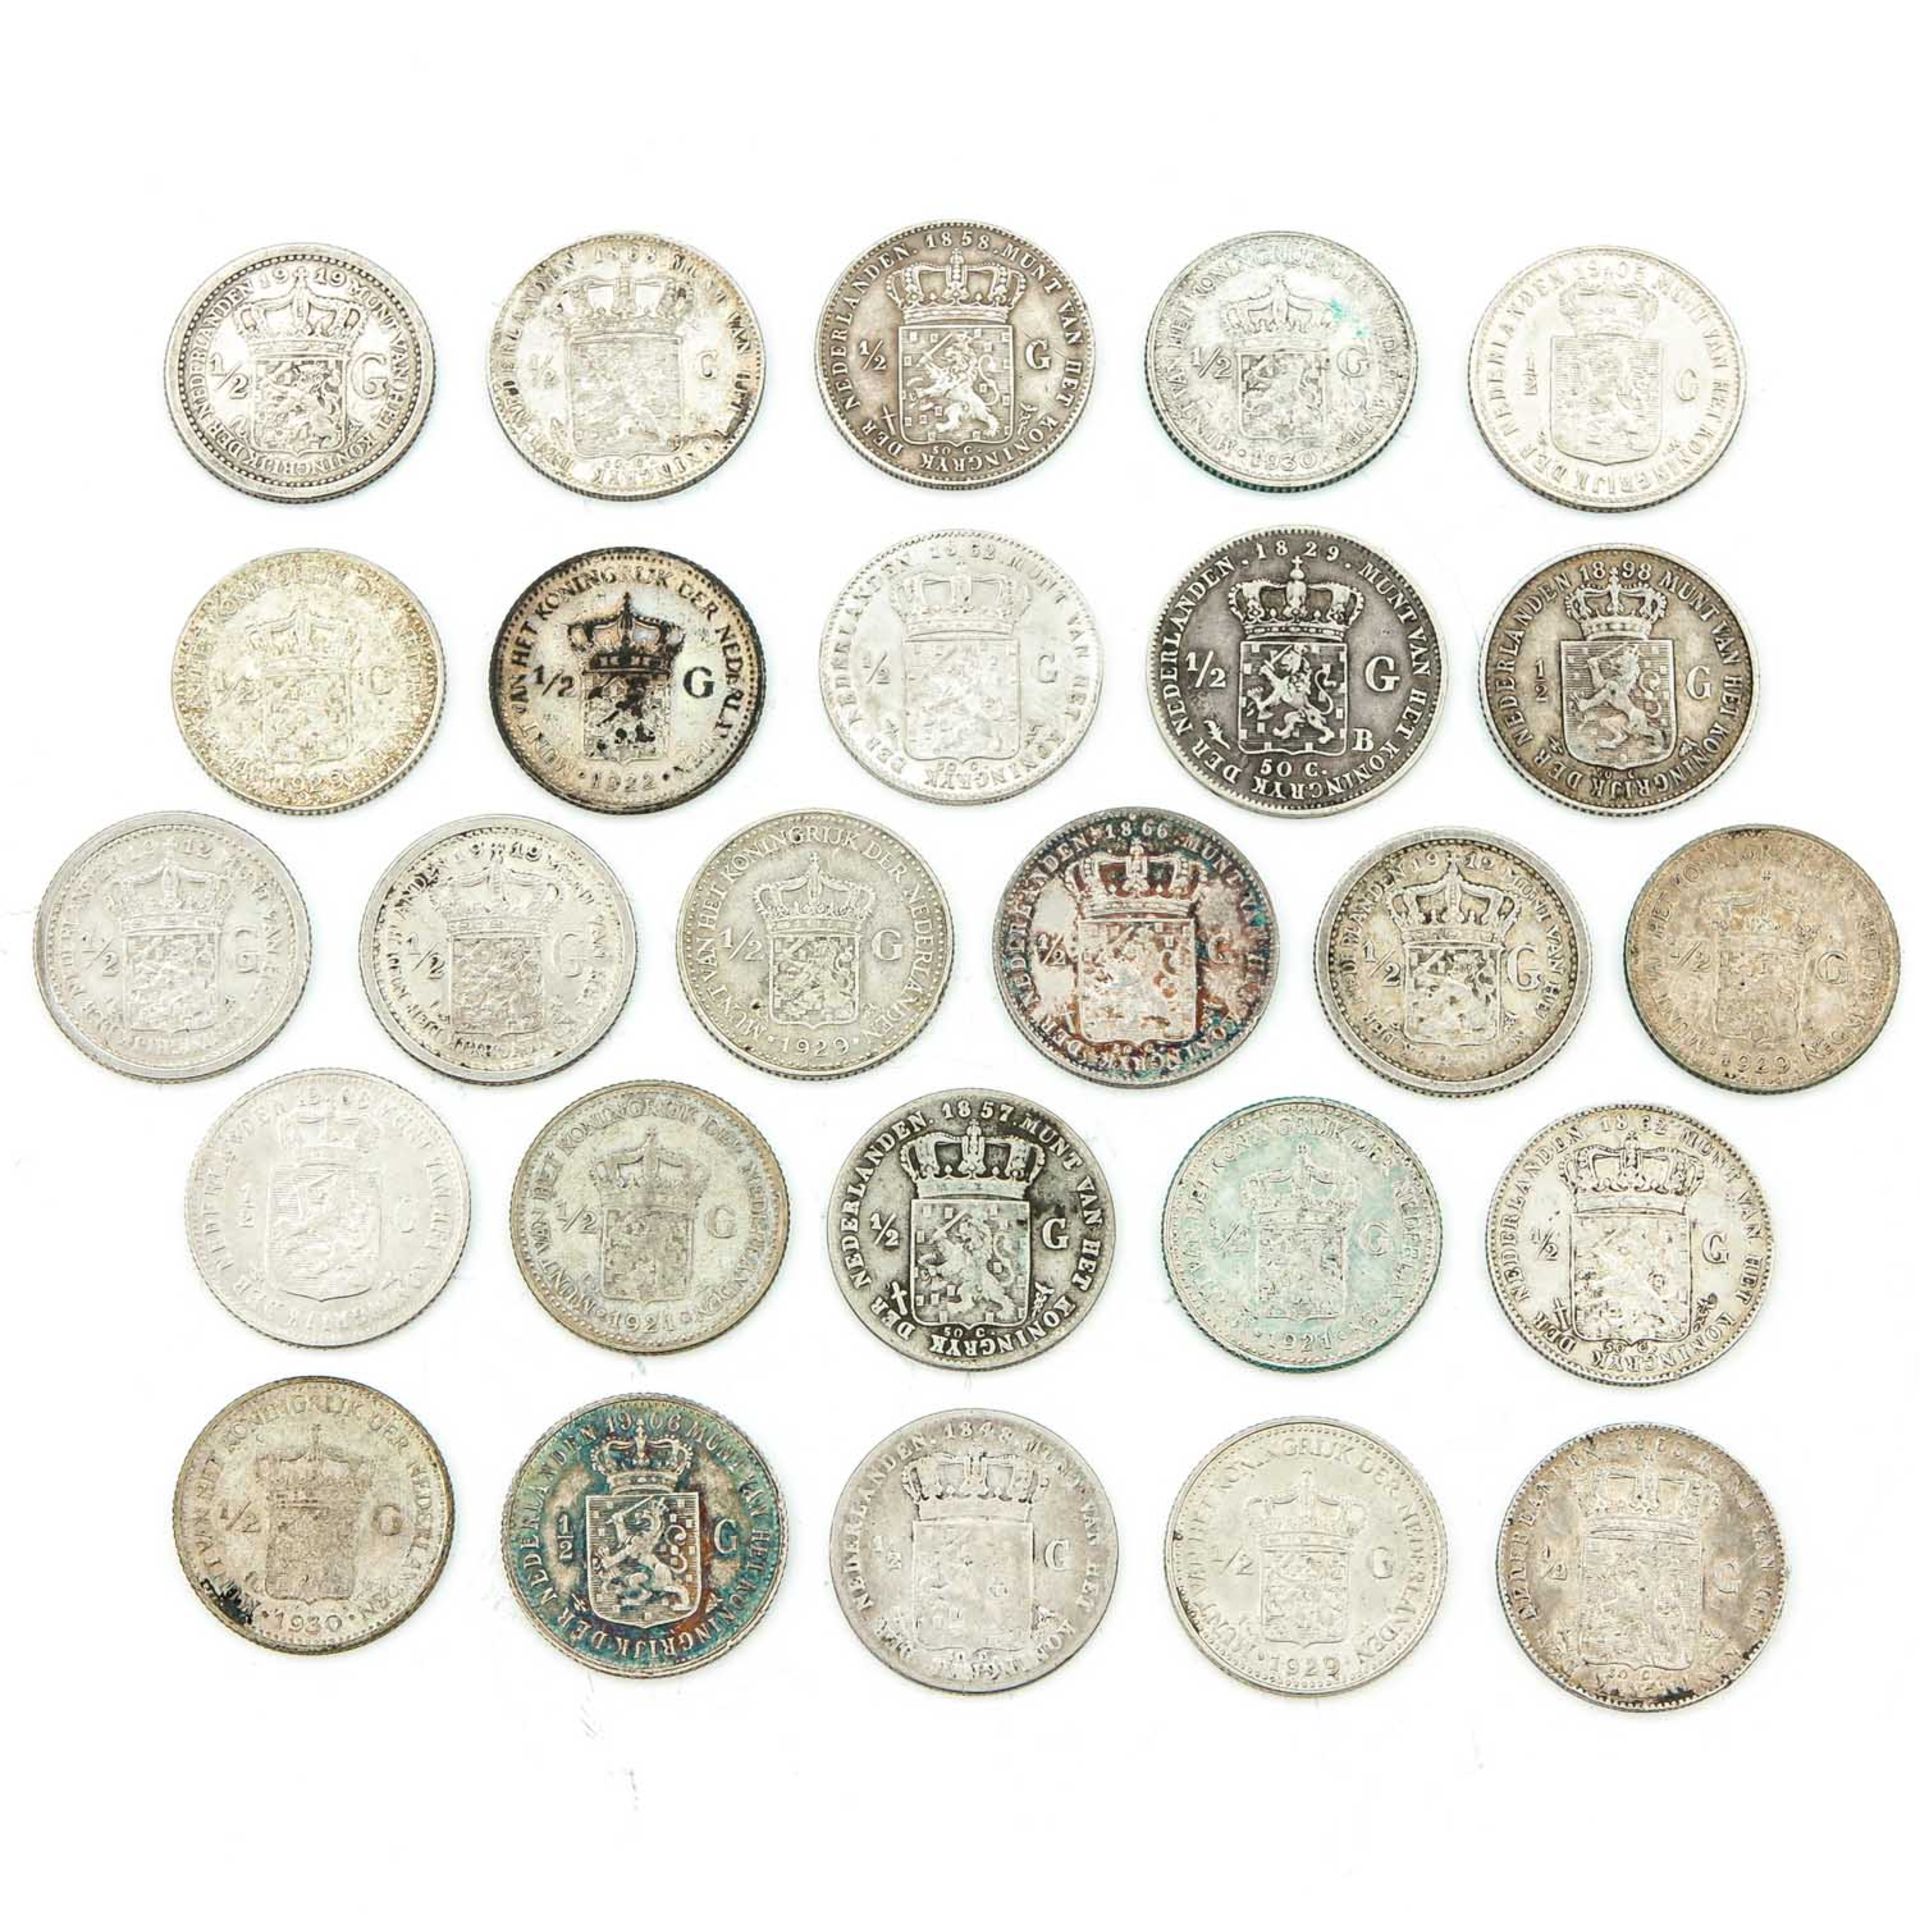 A Collection of 26 Silver 1/2 Guilder